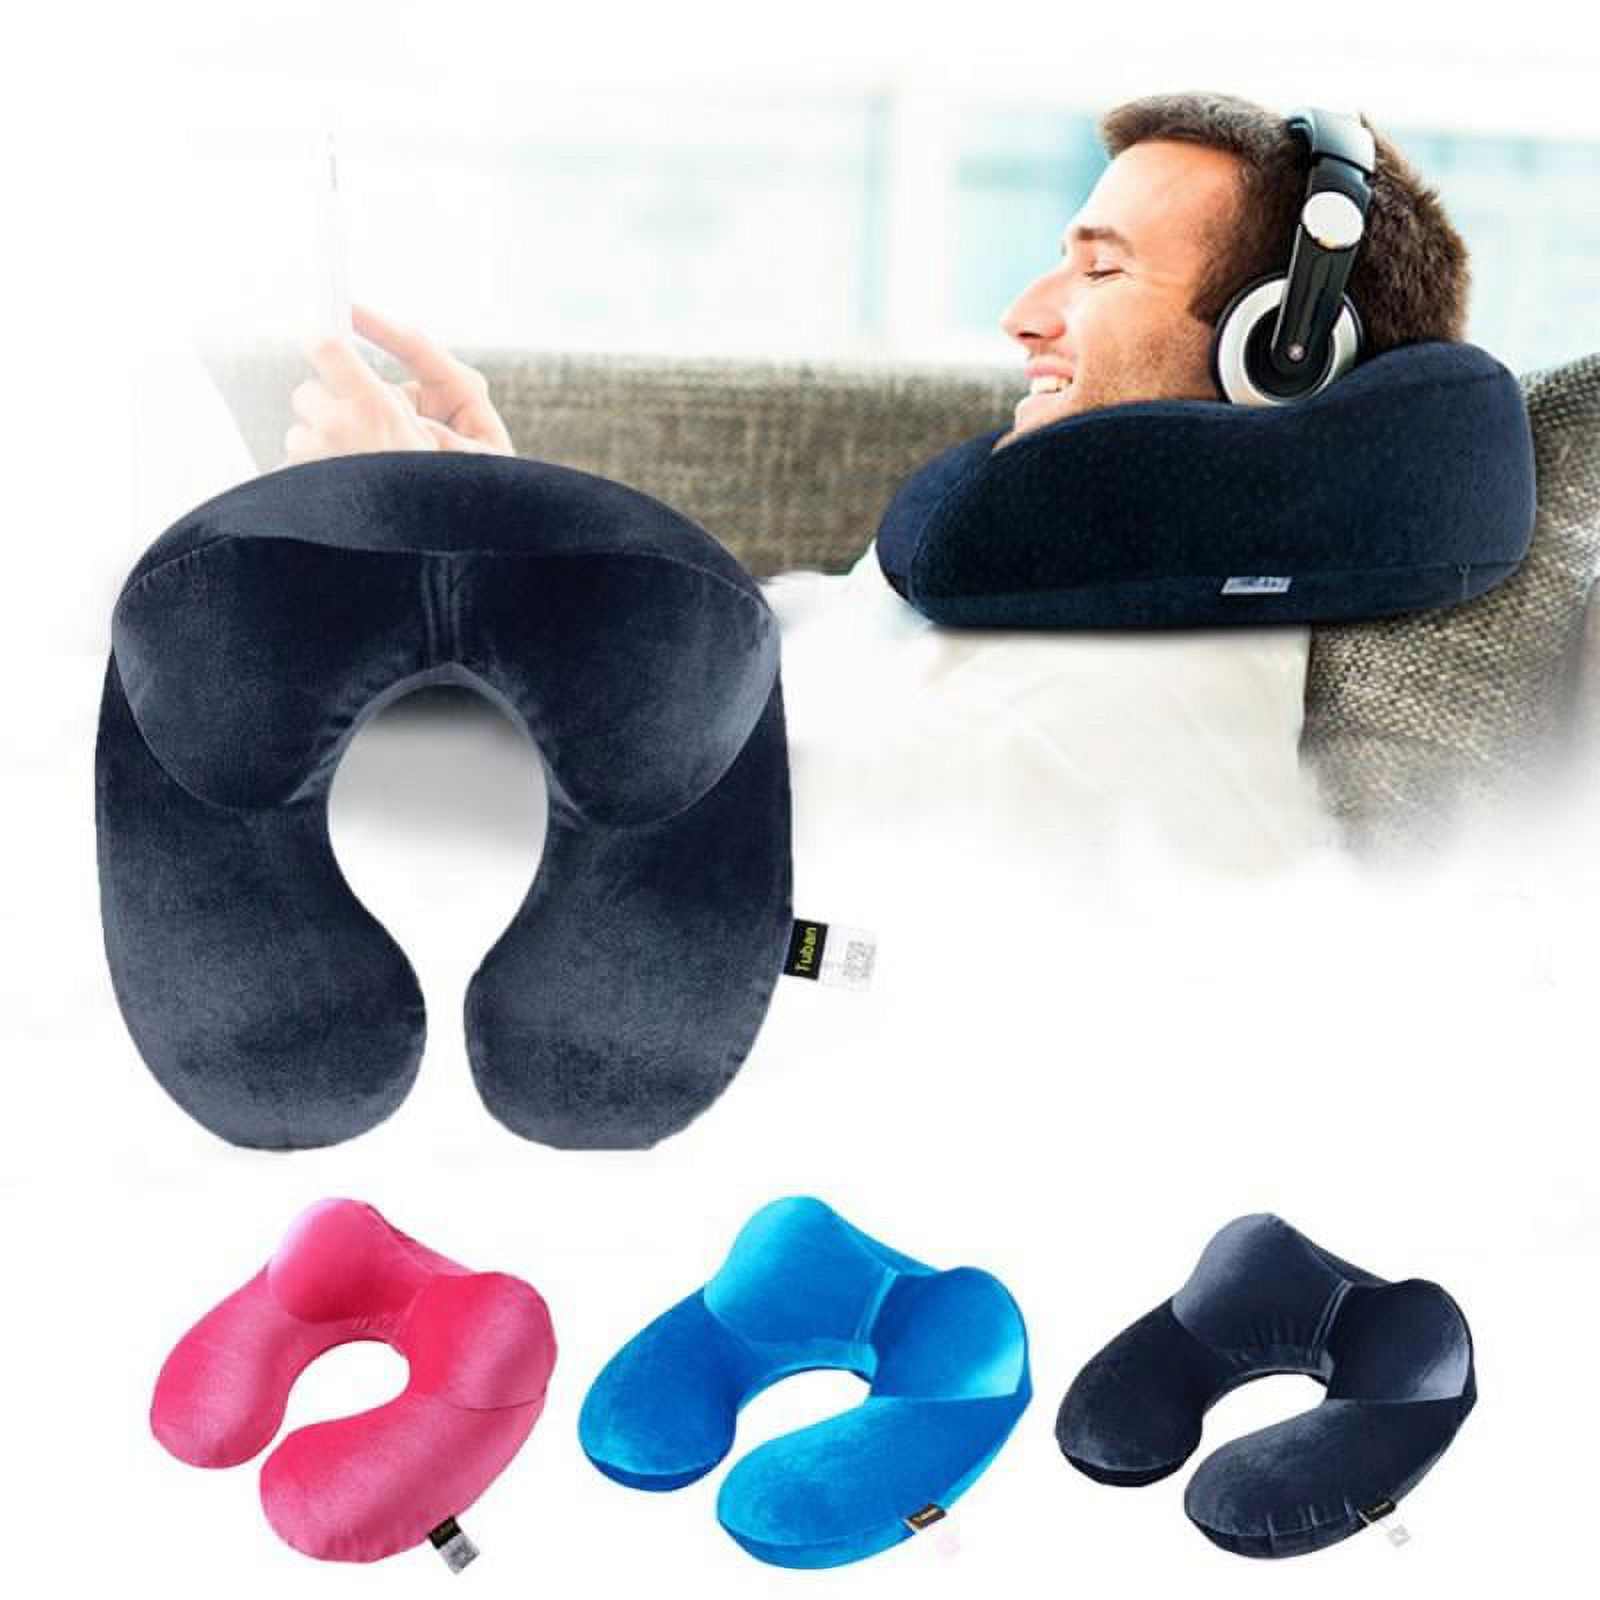 U-Shape Travel Pillow for Airplane Inflatable Neck Pillow Travel Accessories 4 Colors Comfortable Pillows for Sleep Home Textile - image 6 of 6